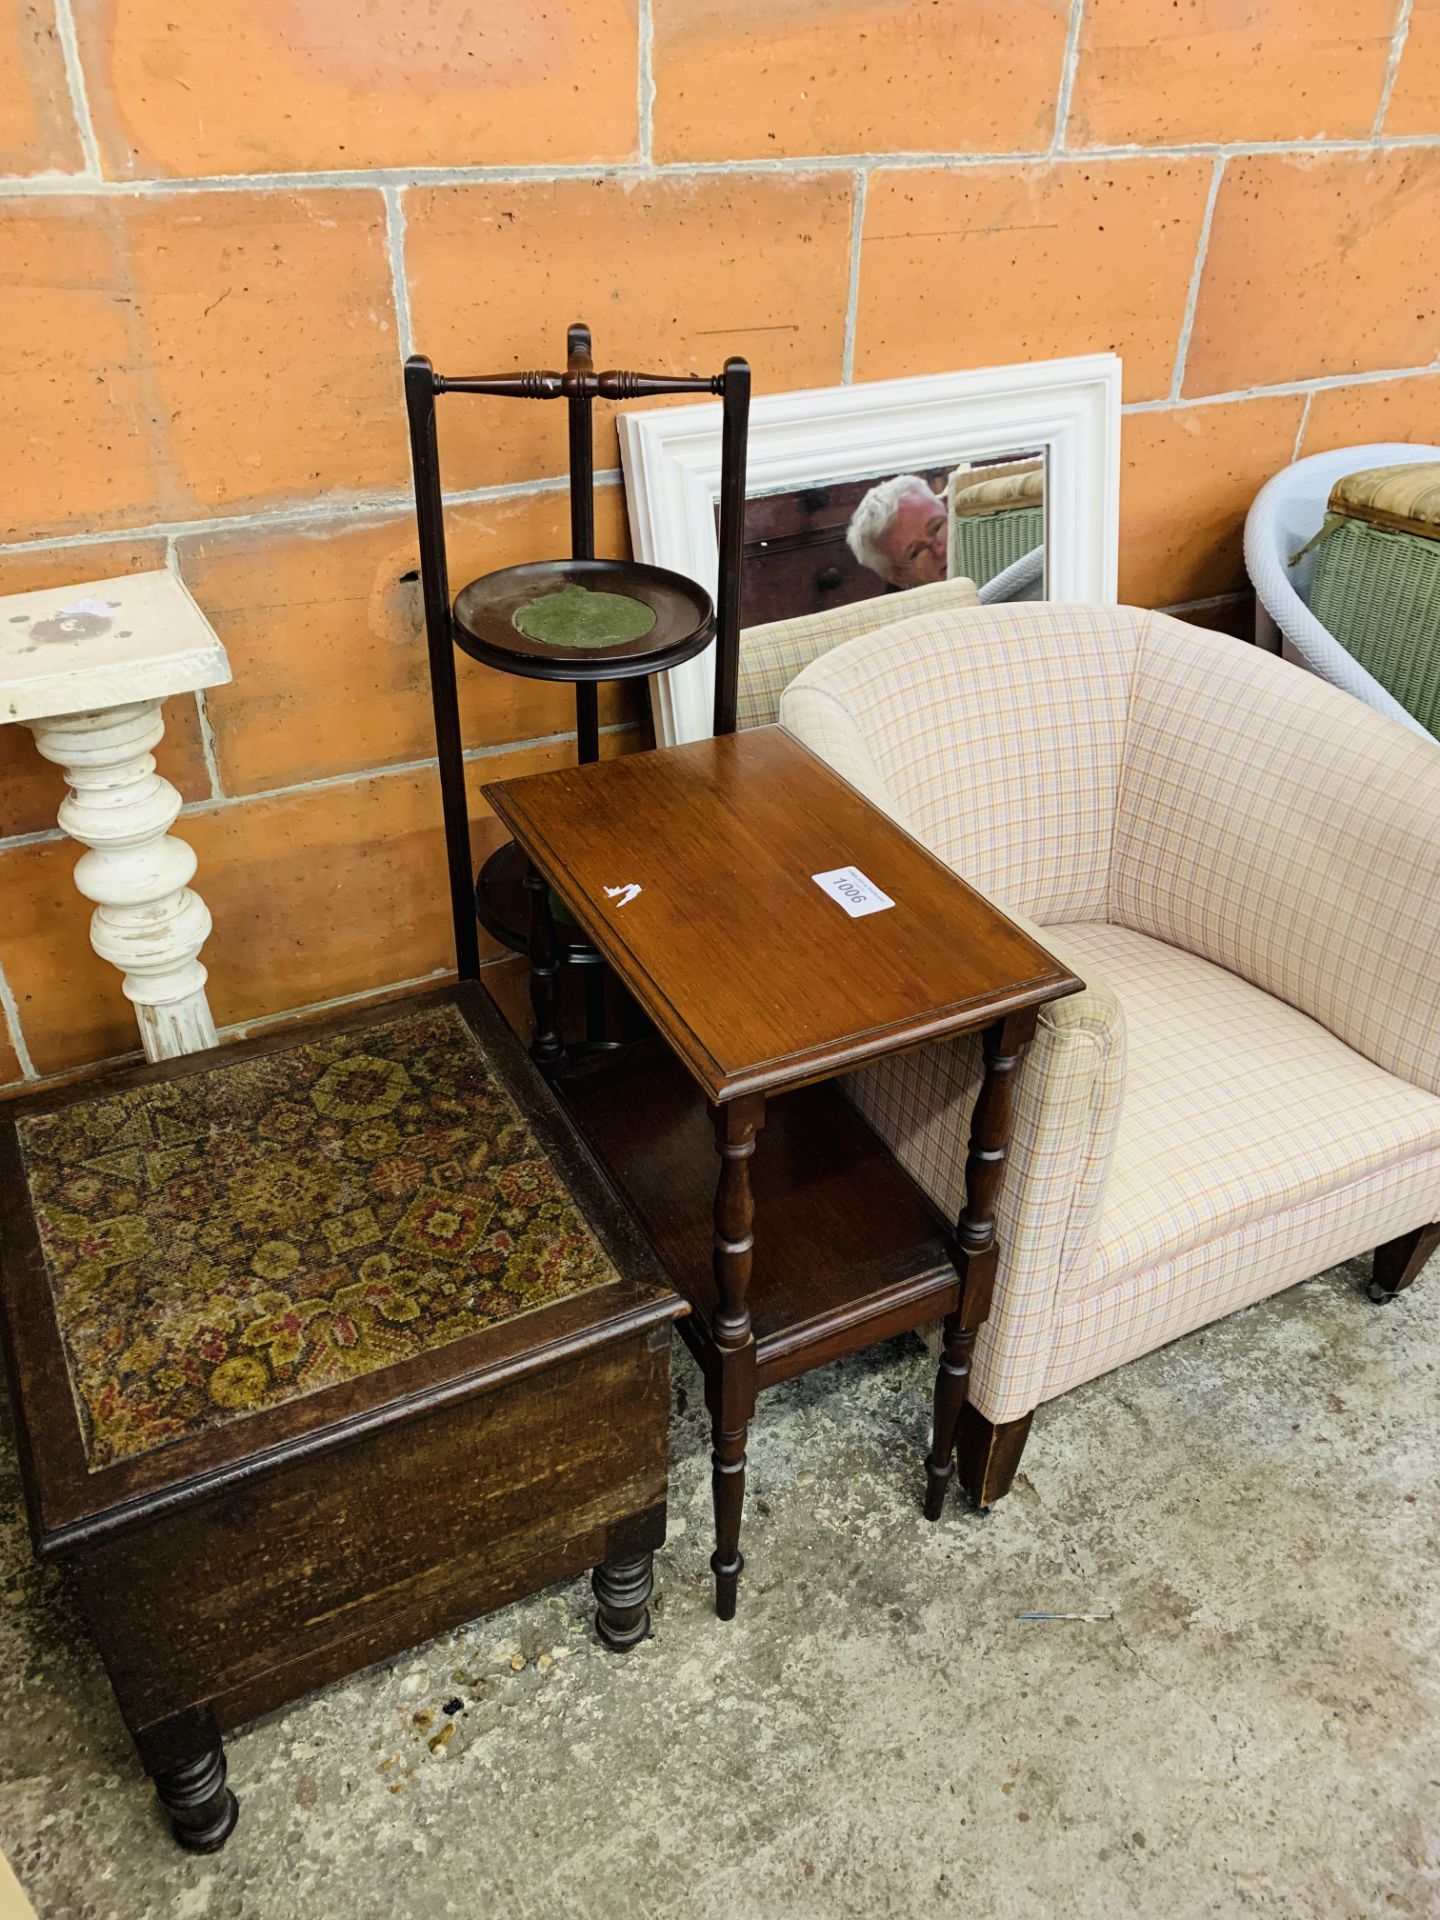 Upholstered tub chair, mirror and three other items of furniture.